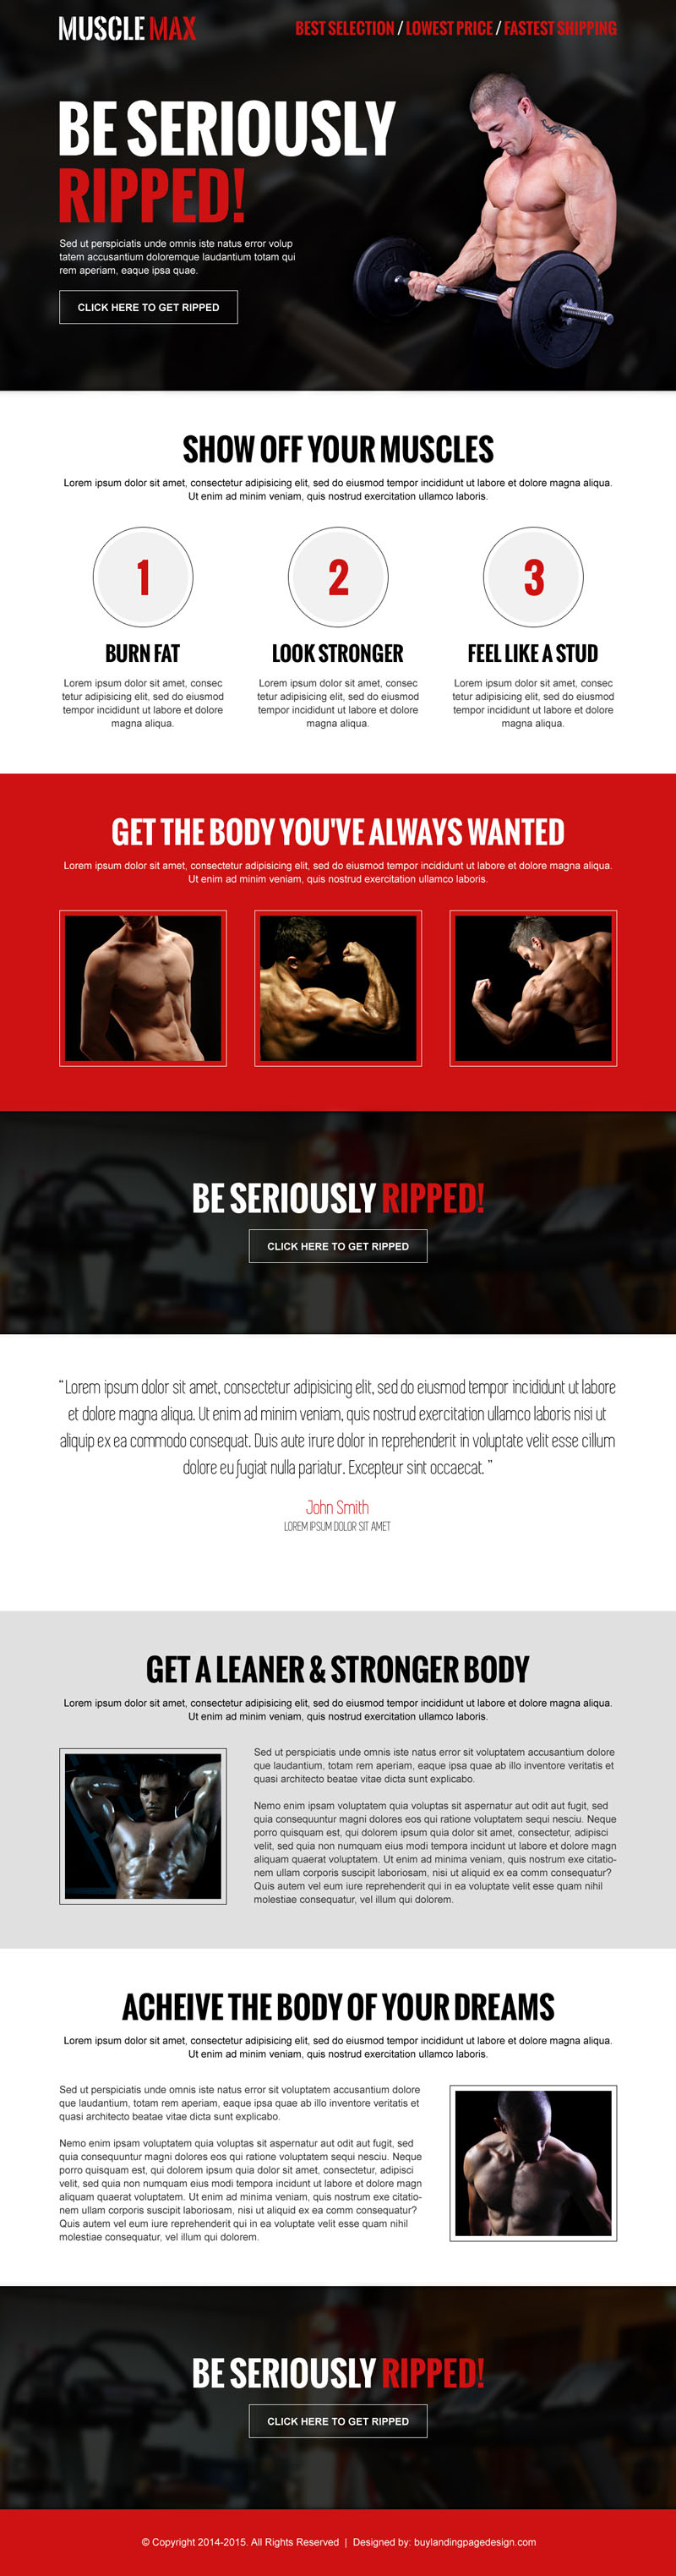 get-ripped-muscle-bodybuilding-call-to-action-informative-landing-page-design-templates-015